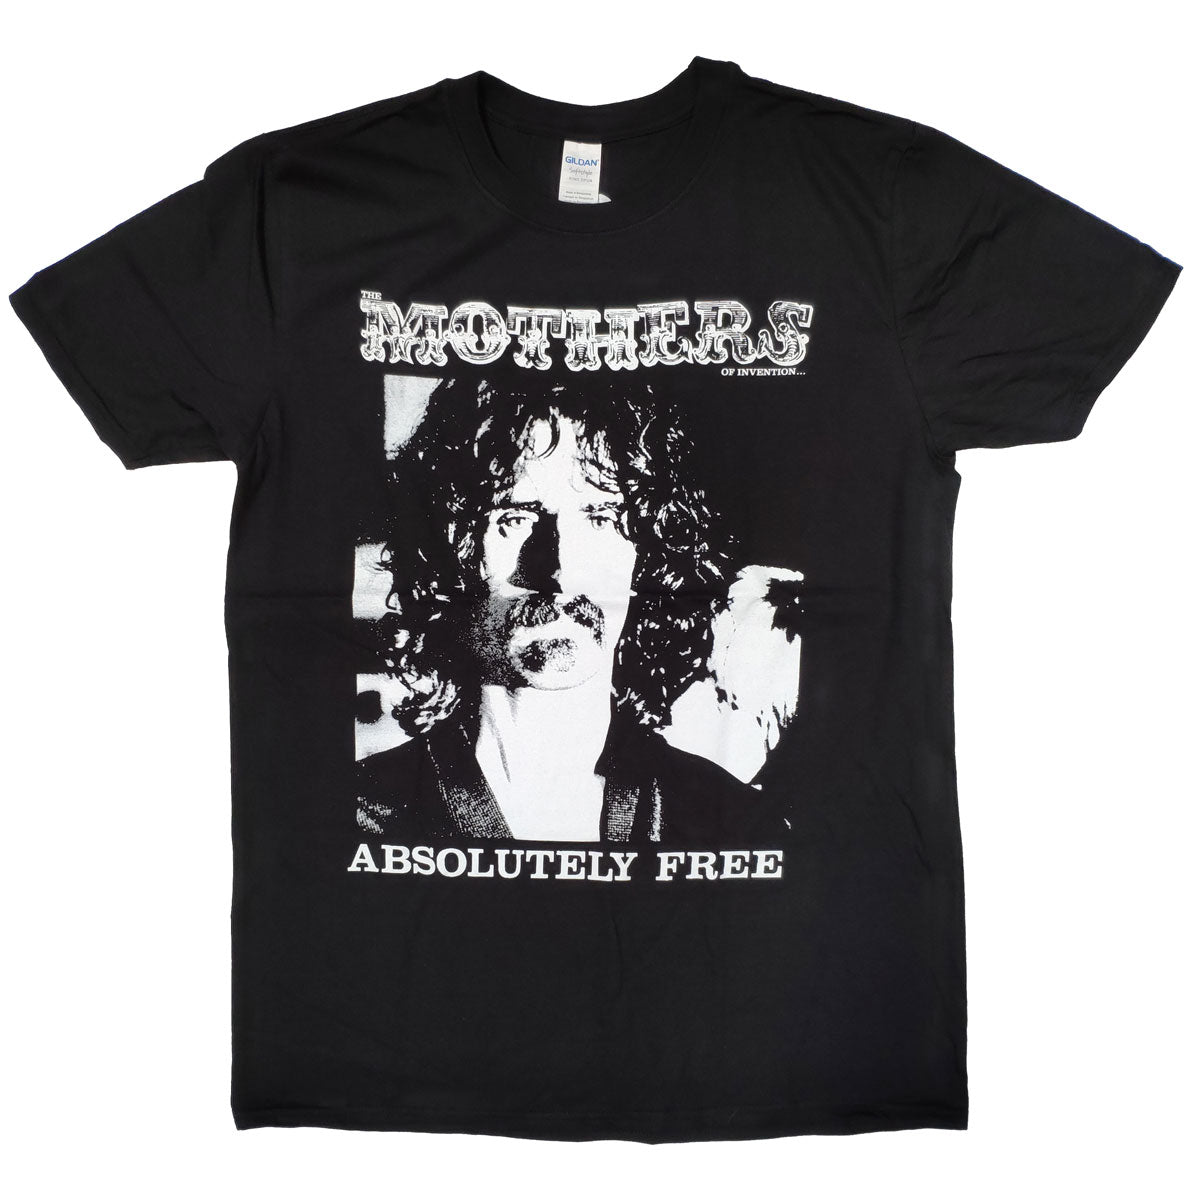 Frank Zappa T Shirt - Absolutely Free Black & White Cover 100% Official Mothers Of Invention